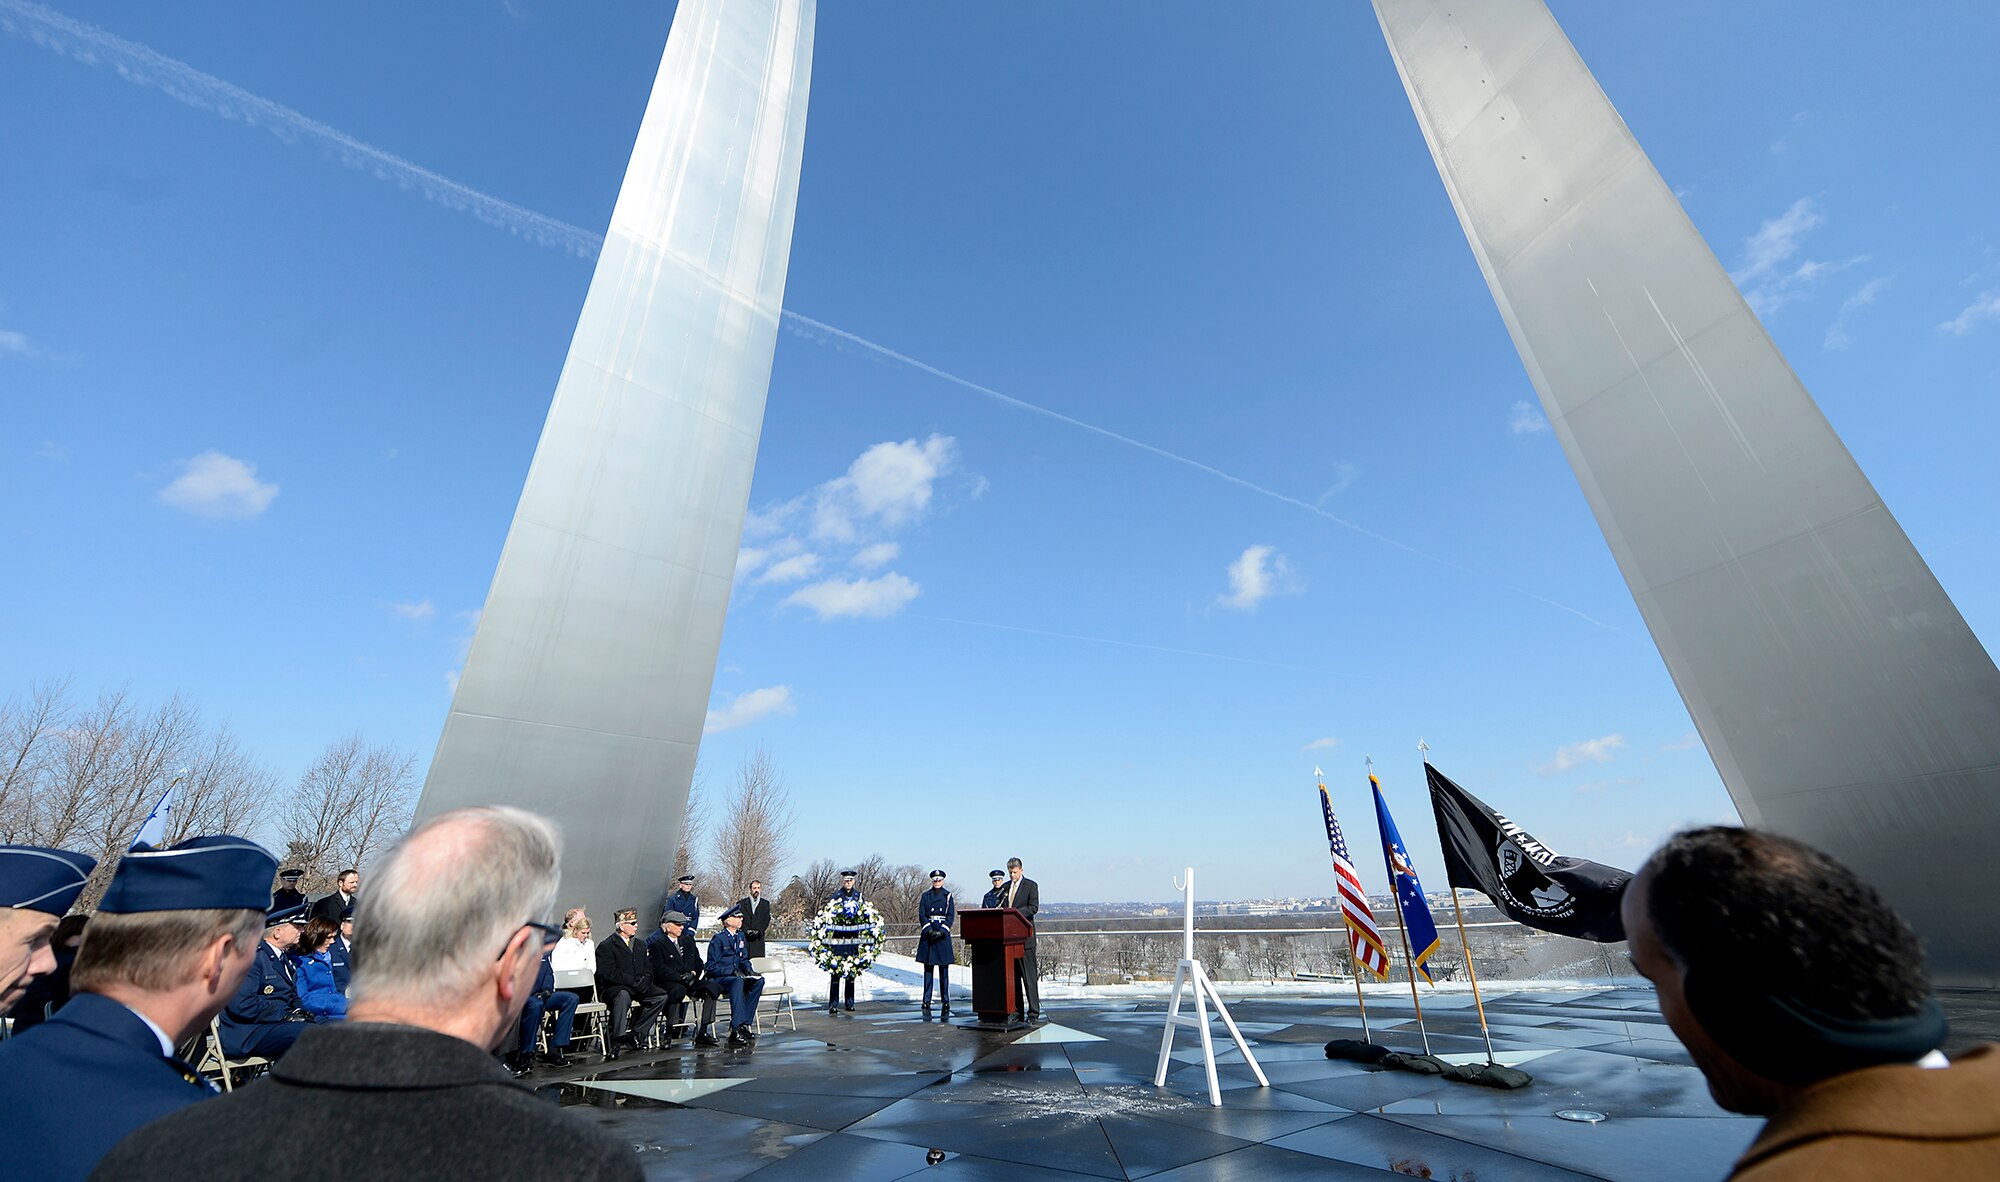 Michael L. Rhodes addresses an audience during a wreath laying ceremony March 2, 2015, which was hosted by Air Force Chief of Staff Gen. Mark A. Welsh III, to honor Air Force Vietnam prisoners of war and missing in action at the Air Force Memorial in Arlington, Va. Rhodes is the director of administration and management for the Office of the Secretary of Defense. (U.S. Air Force photo/Scott M. Ash)